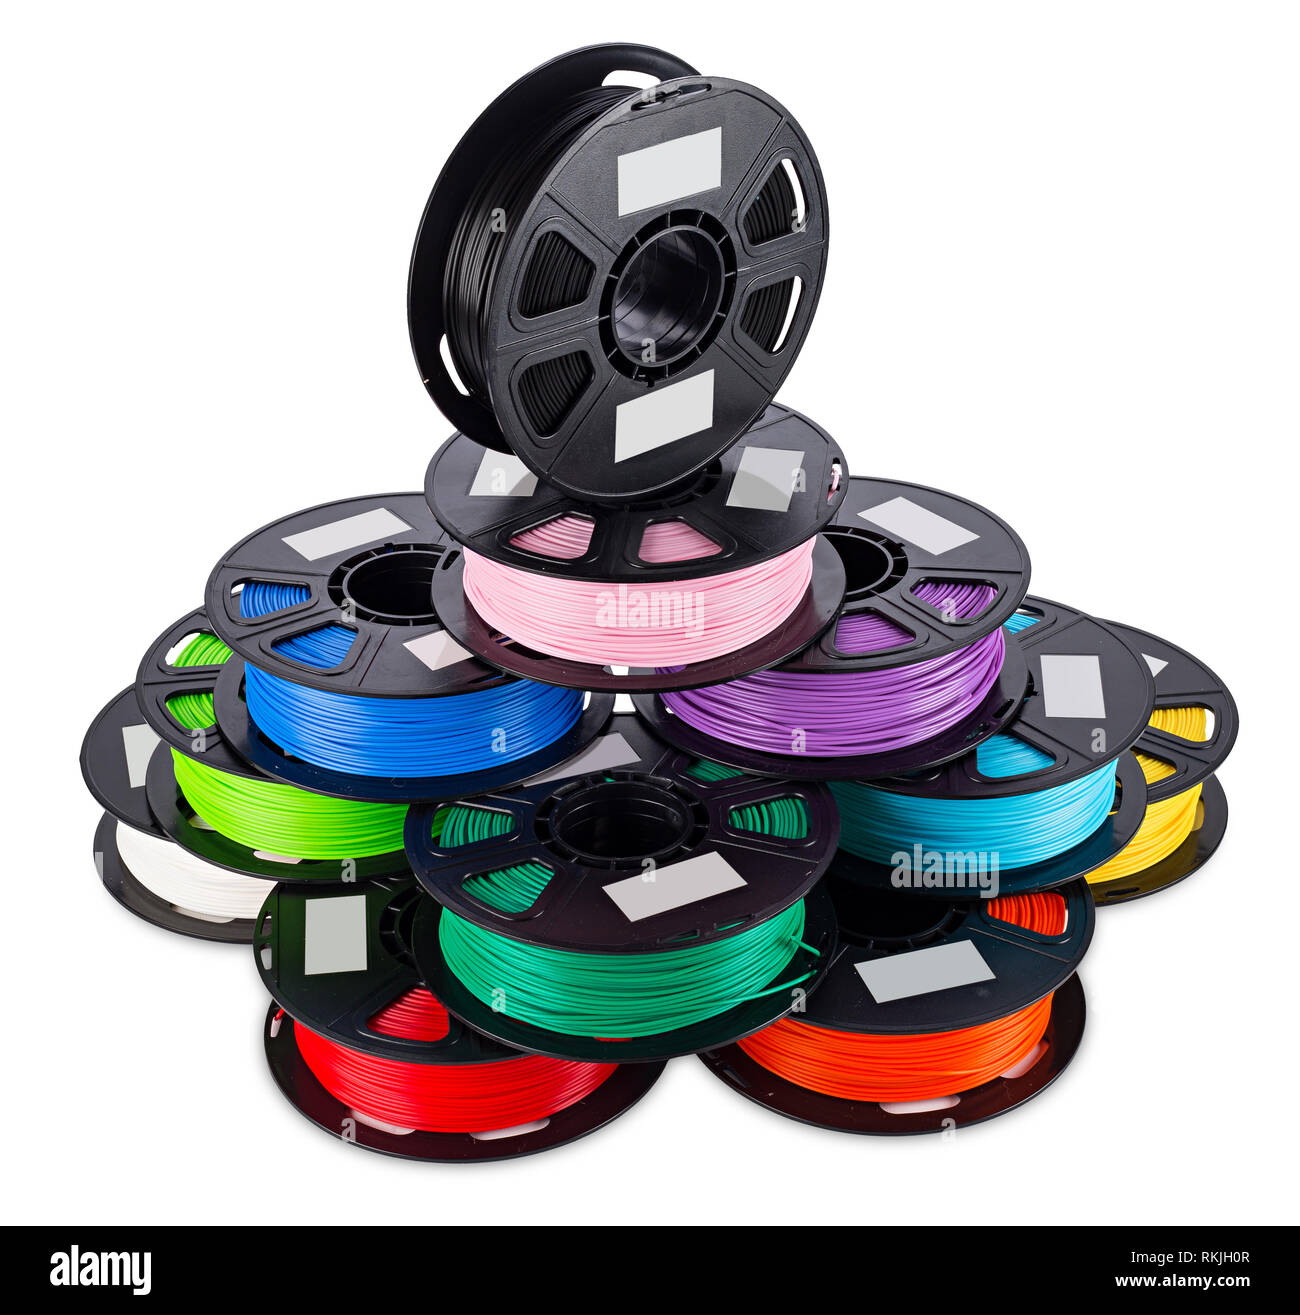 colorful bright stack pile of spool 3d printer pla abs filament plastic material isolated on white background Stock Photo